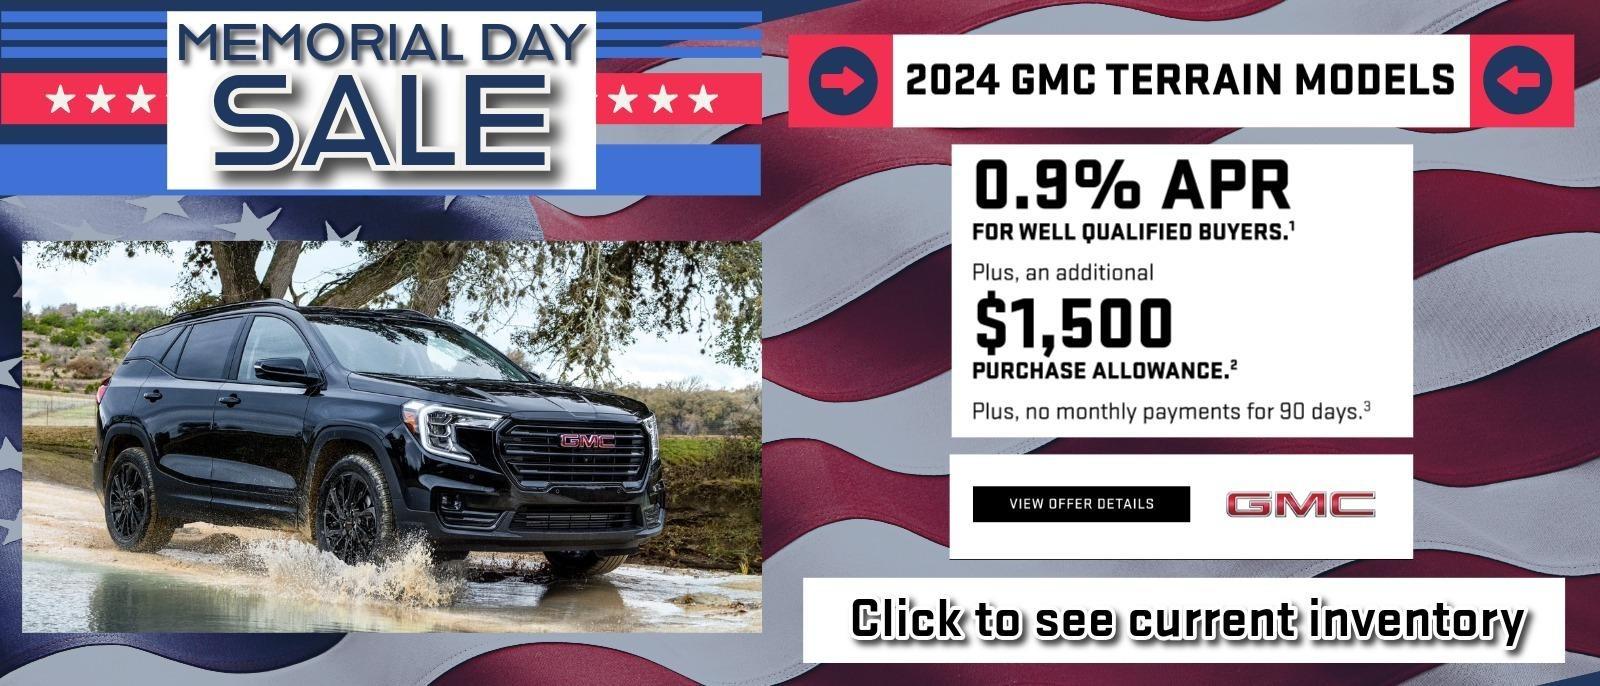 Memorial Day Slide showing 2024 GMC Terrain Offer of 0.9% APR plus an addiotnal $1,500 Purchase Allowance.  Some restrictions apply.